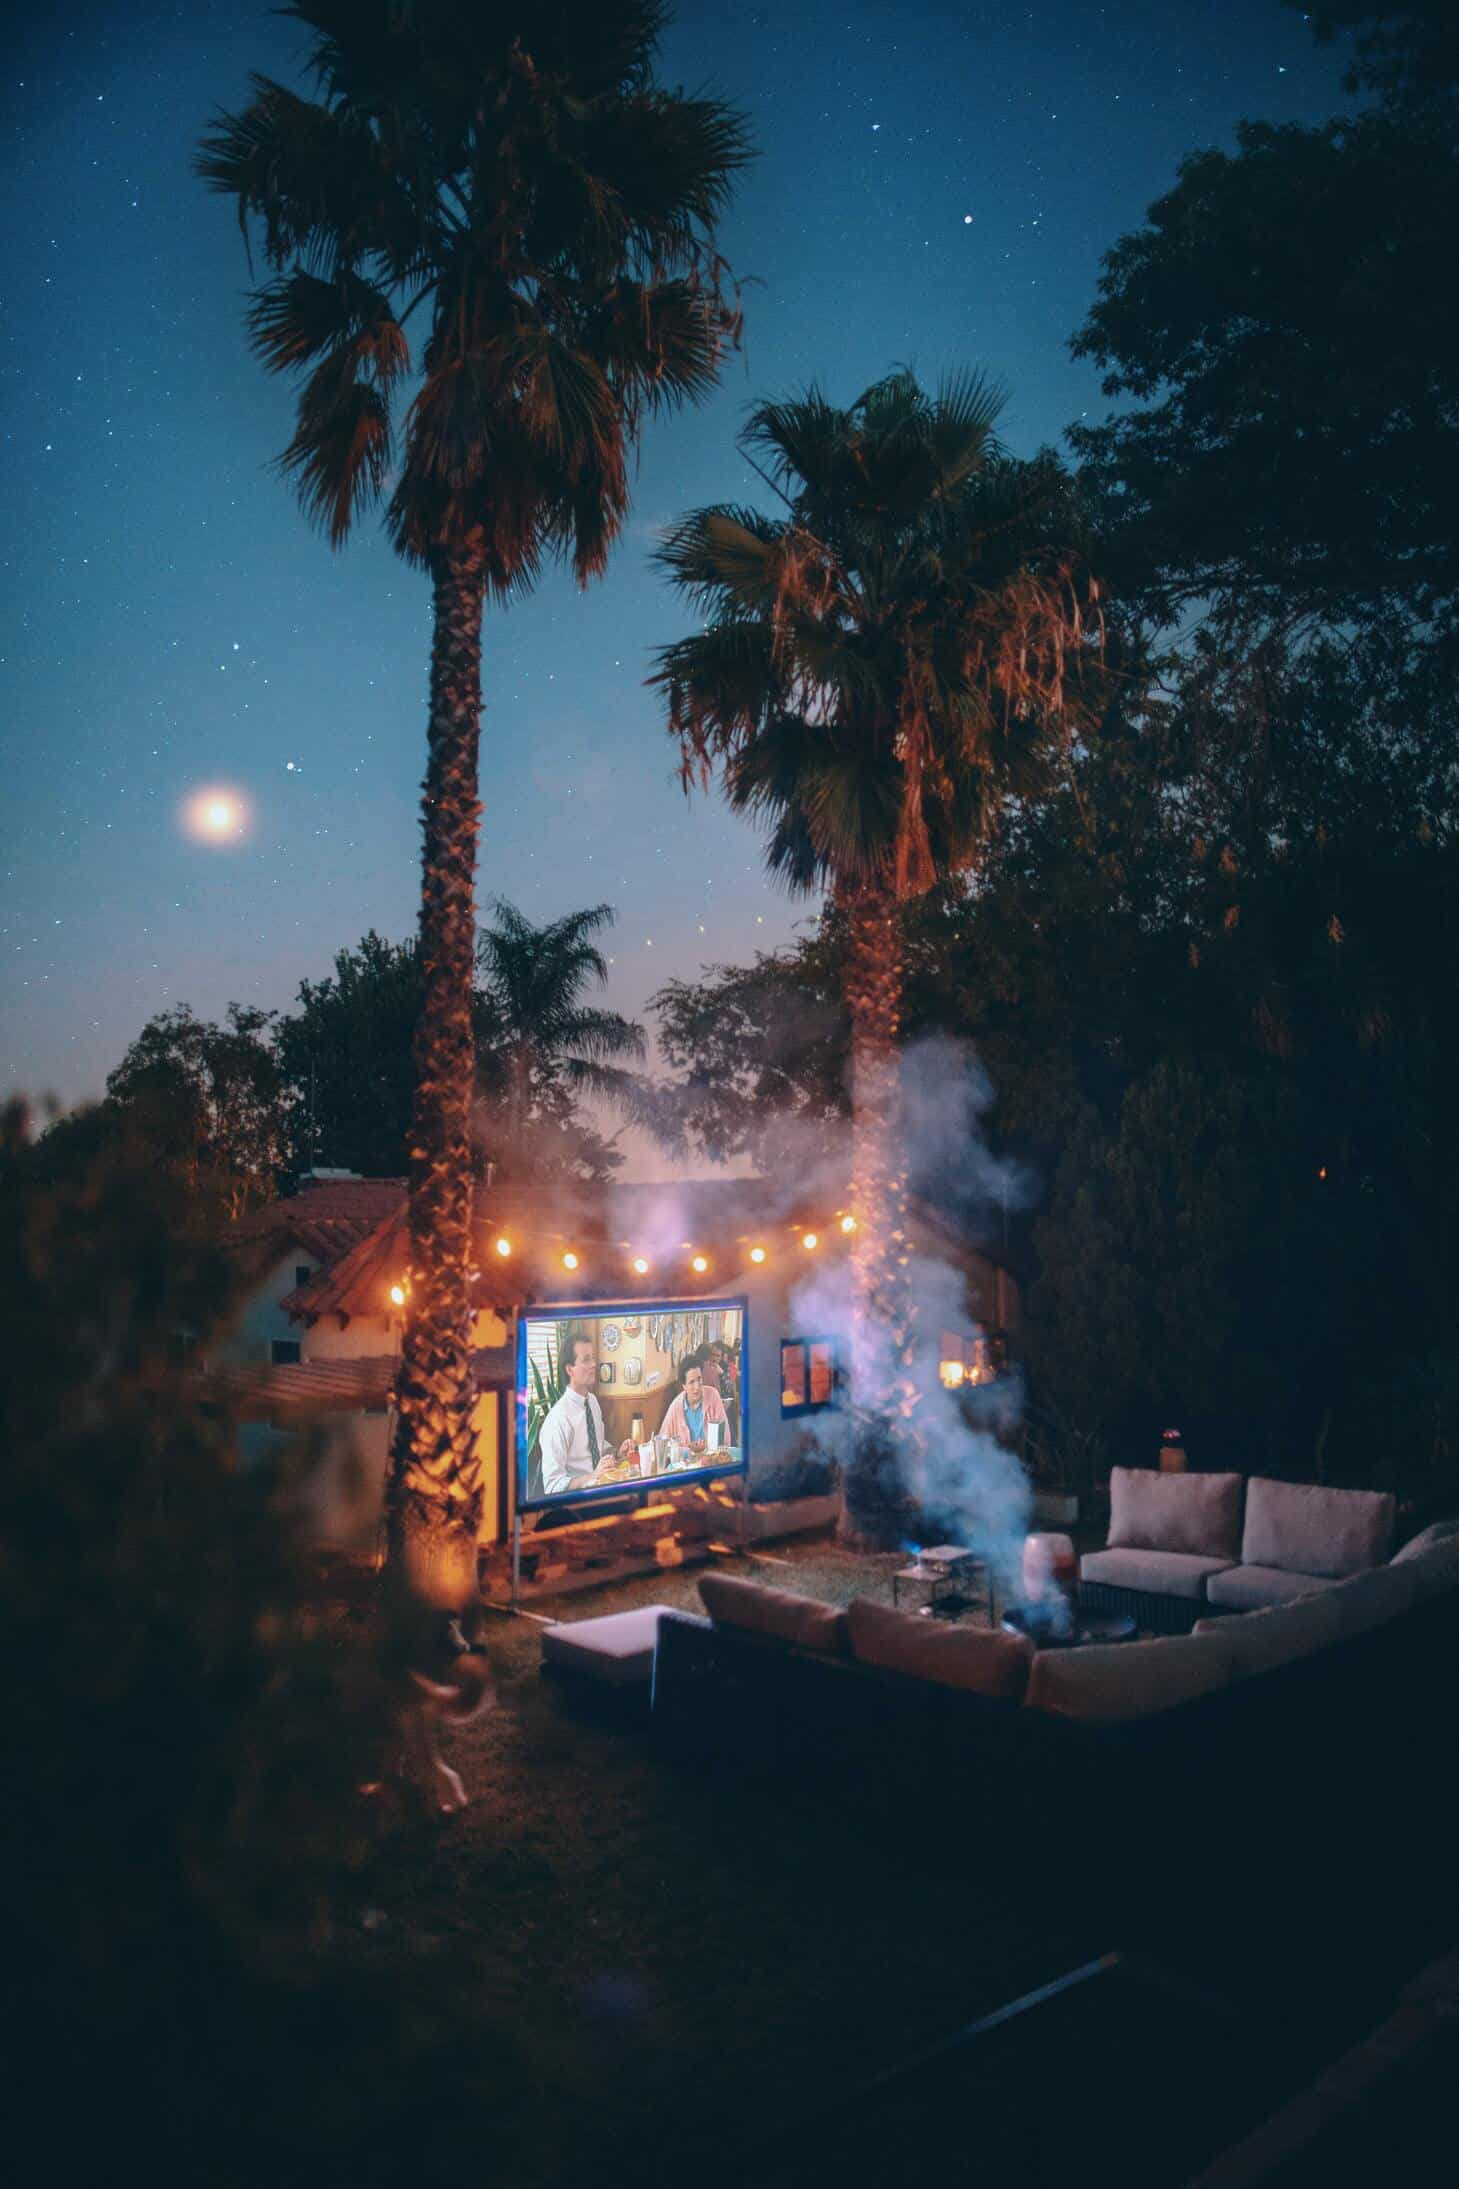 movie projected outdoors with couch